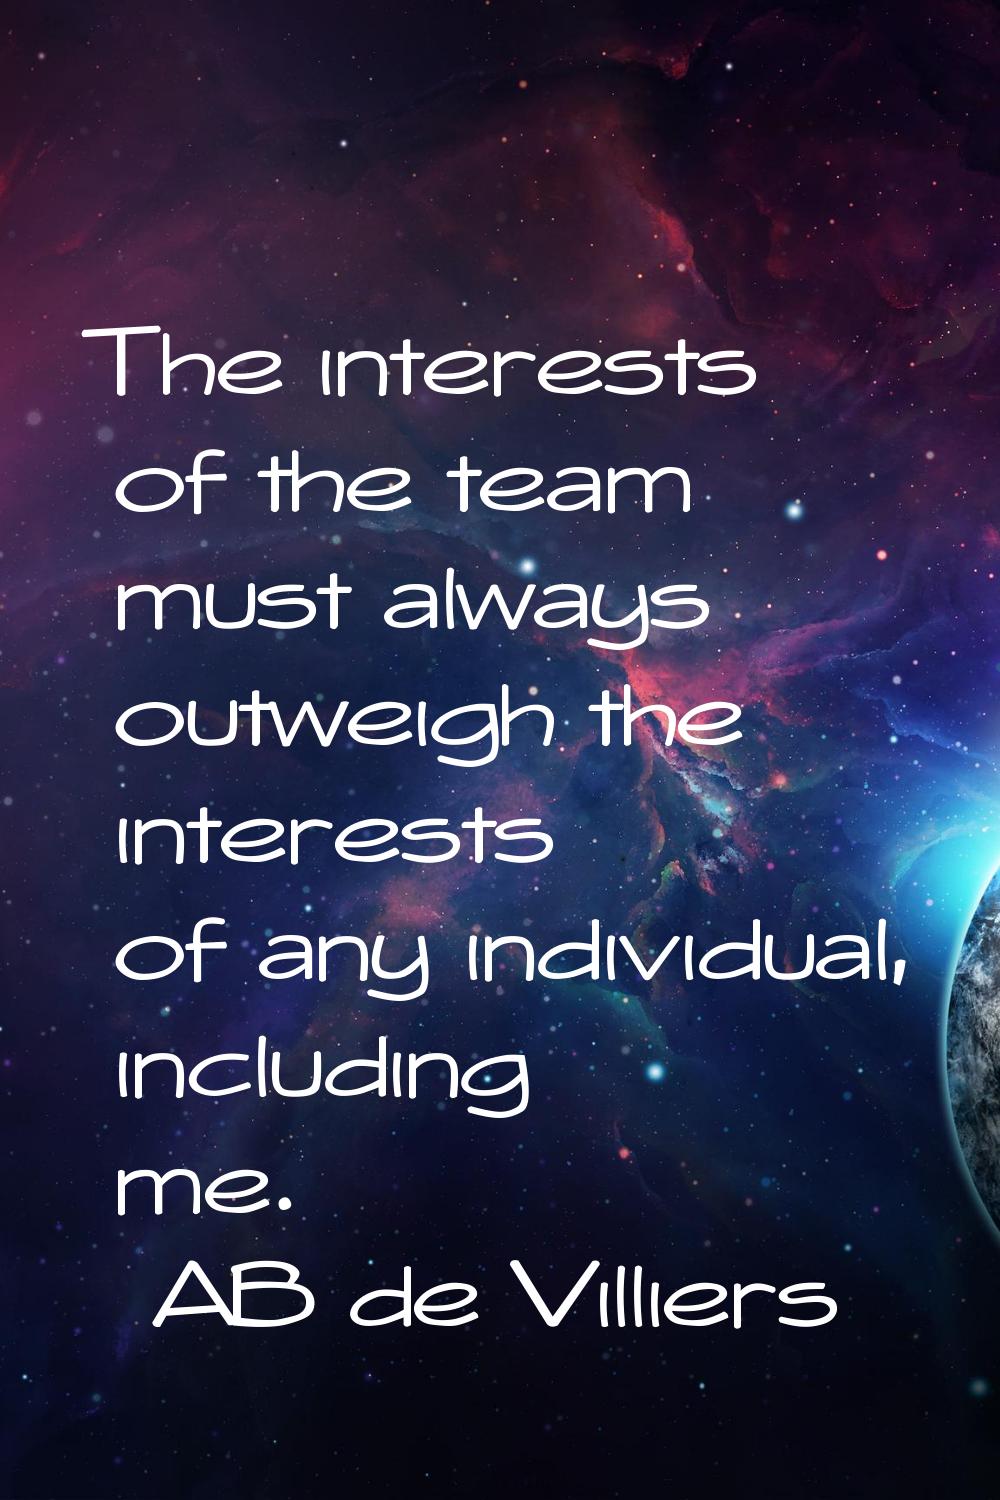 The interests of the team must always outweigh the interests of any individual, including me.